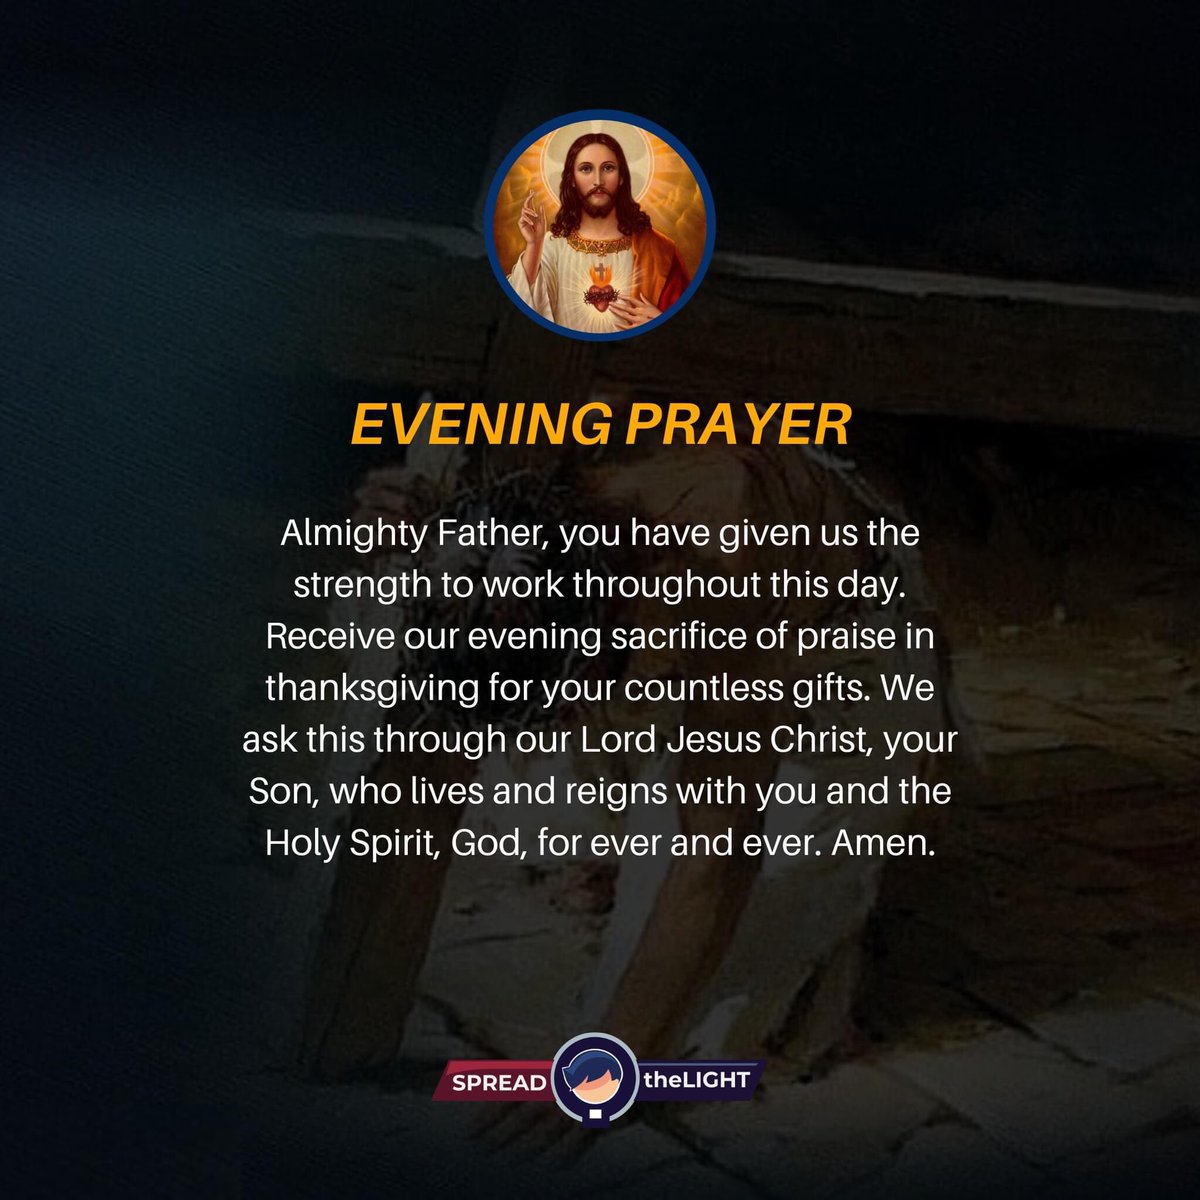 #EVENINGPRAYER 

Father, you have given us the strength to work throughout this day. Receive our evening sacrifice of praise in thanksgiving for your countless gifts. 

We ask this through our Lord Jesus Christ, your Son, who lives and reigns with you and the Holy Spirit, God,…